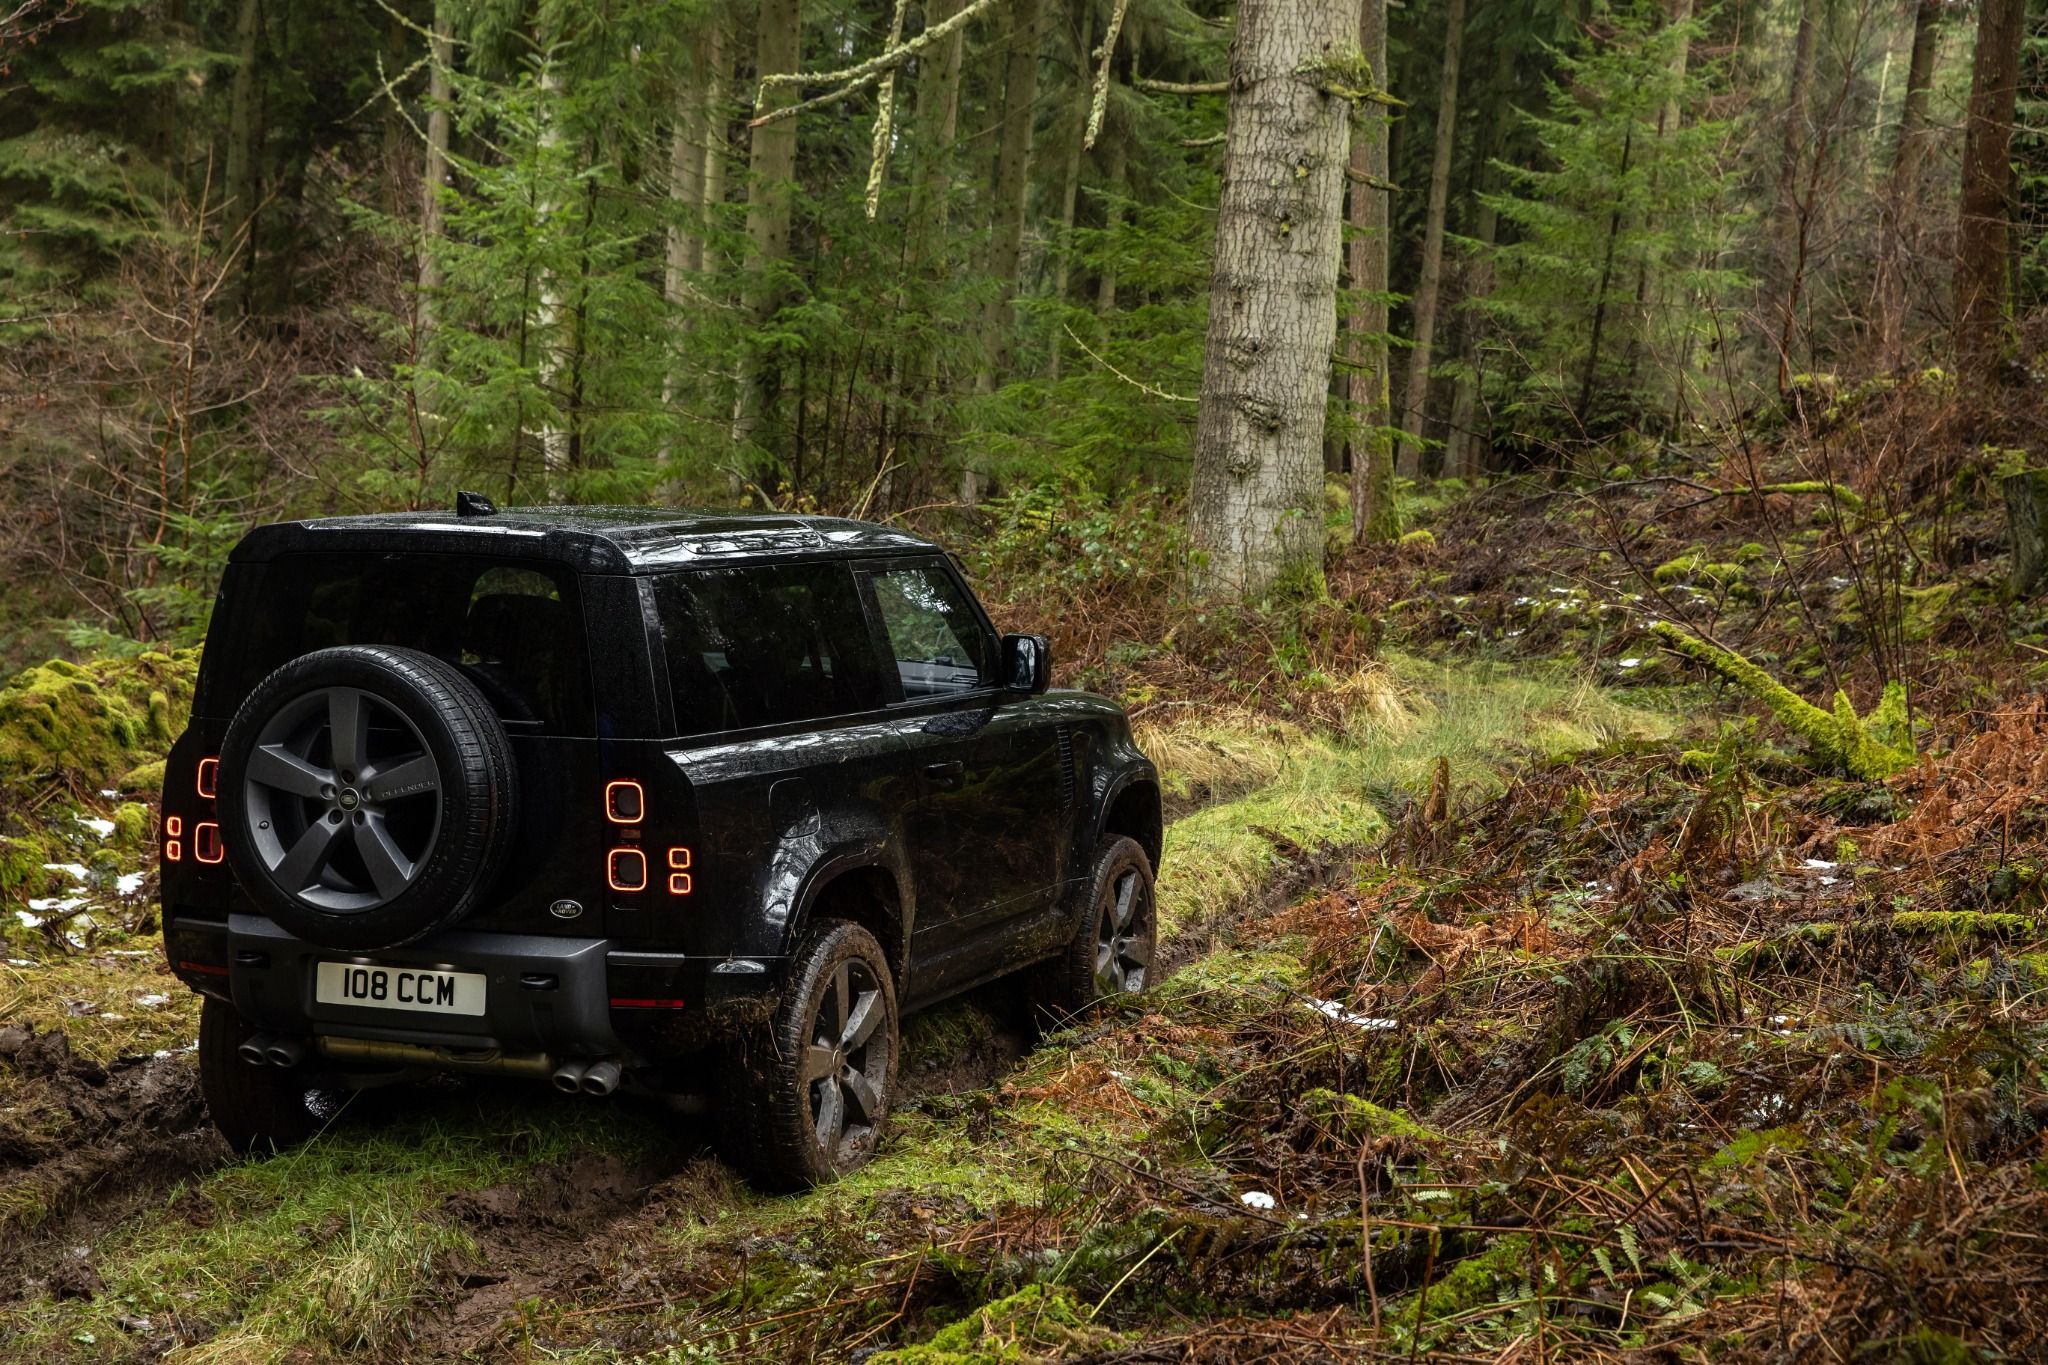 Review of the Land Rover Defender V8